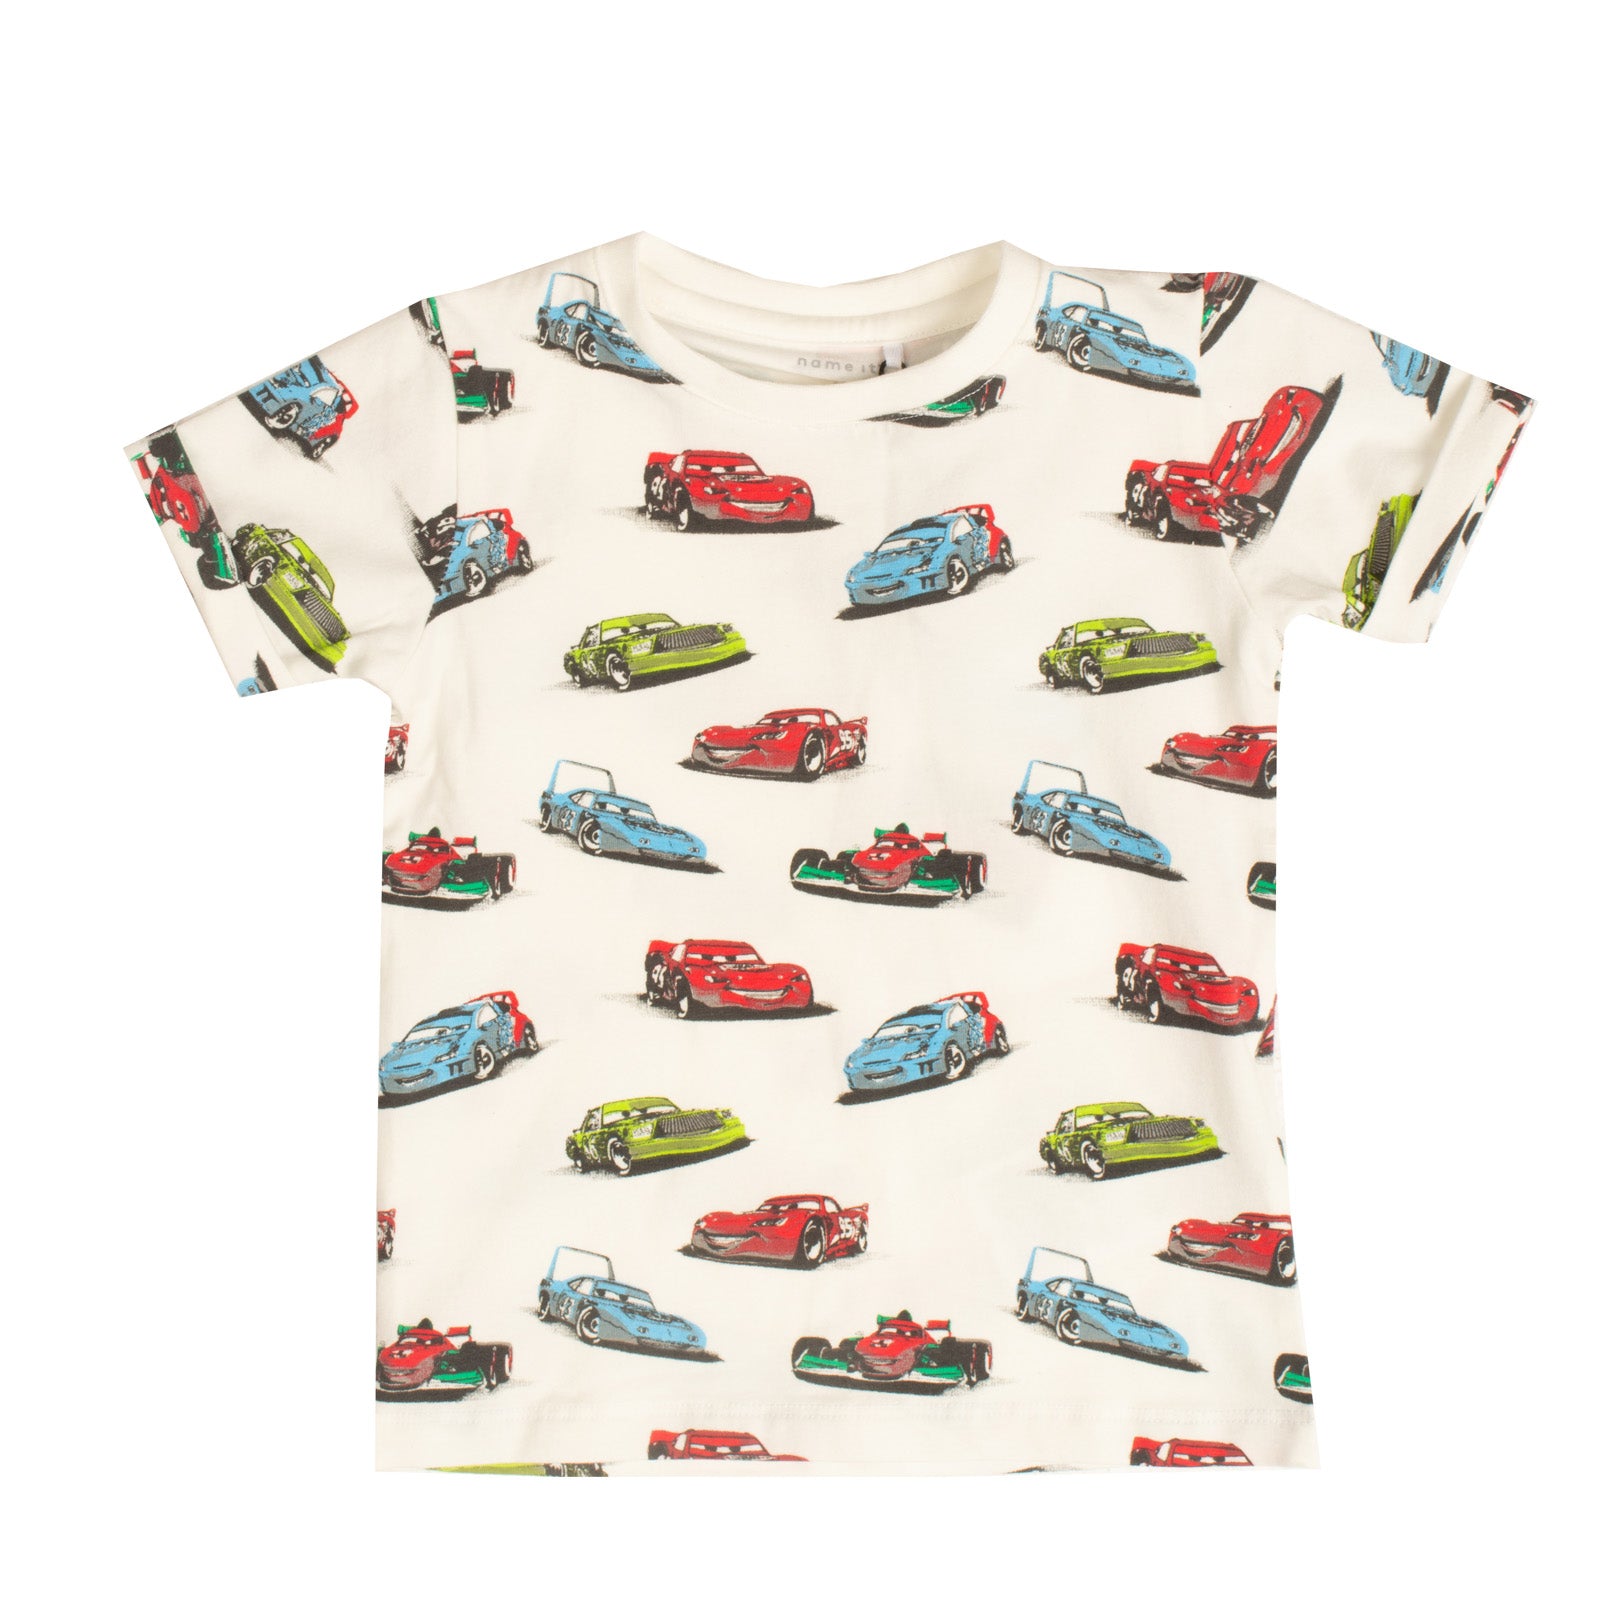 NAME IT T-Shirt Top Size 9-12M / 80CM Printed 'Cars' Turn Up Cuffs Short Sleeve gallery main photo